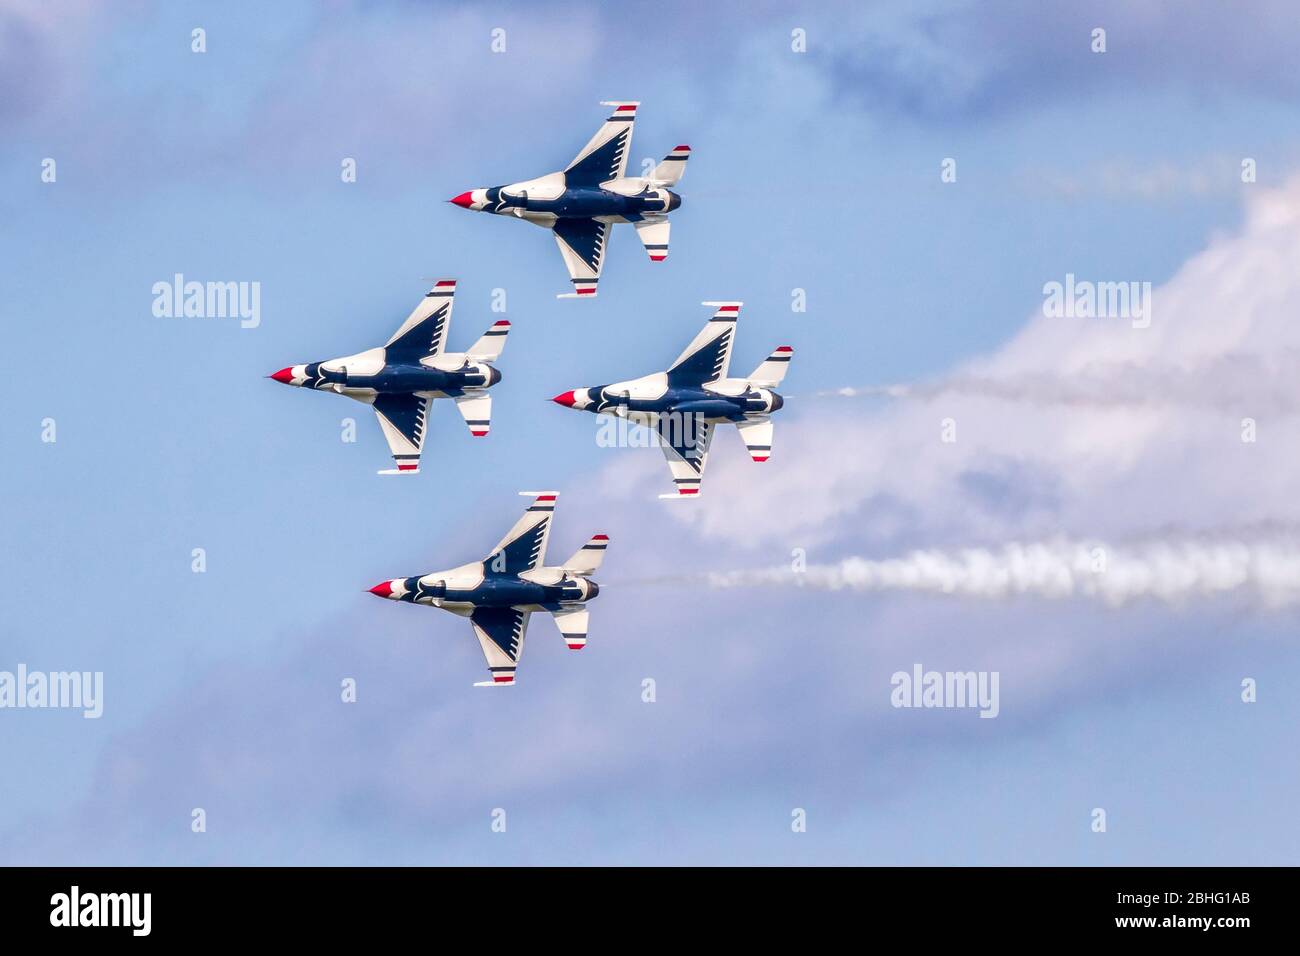 United States Air Force Thunderbirds performing their precision flying demonstration at 2019 Wings Over Houston, Houston, Texas. Stock Photo